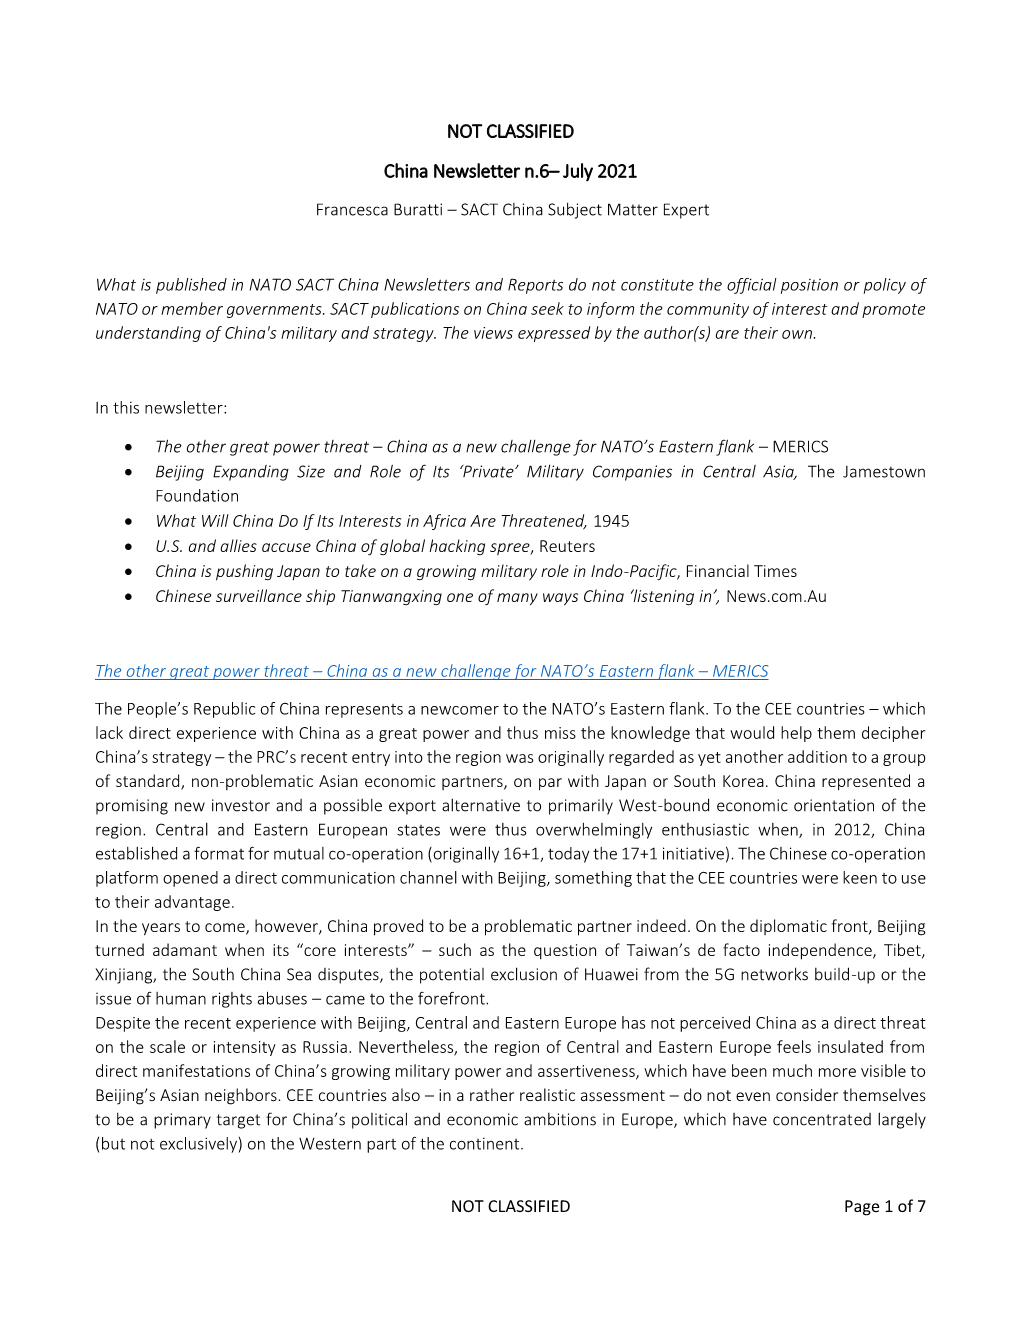 NOT CLASSIFIED China Newsletter N.6– July 2021